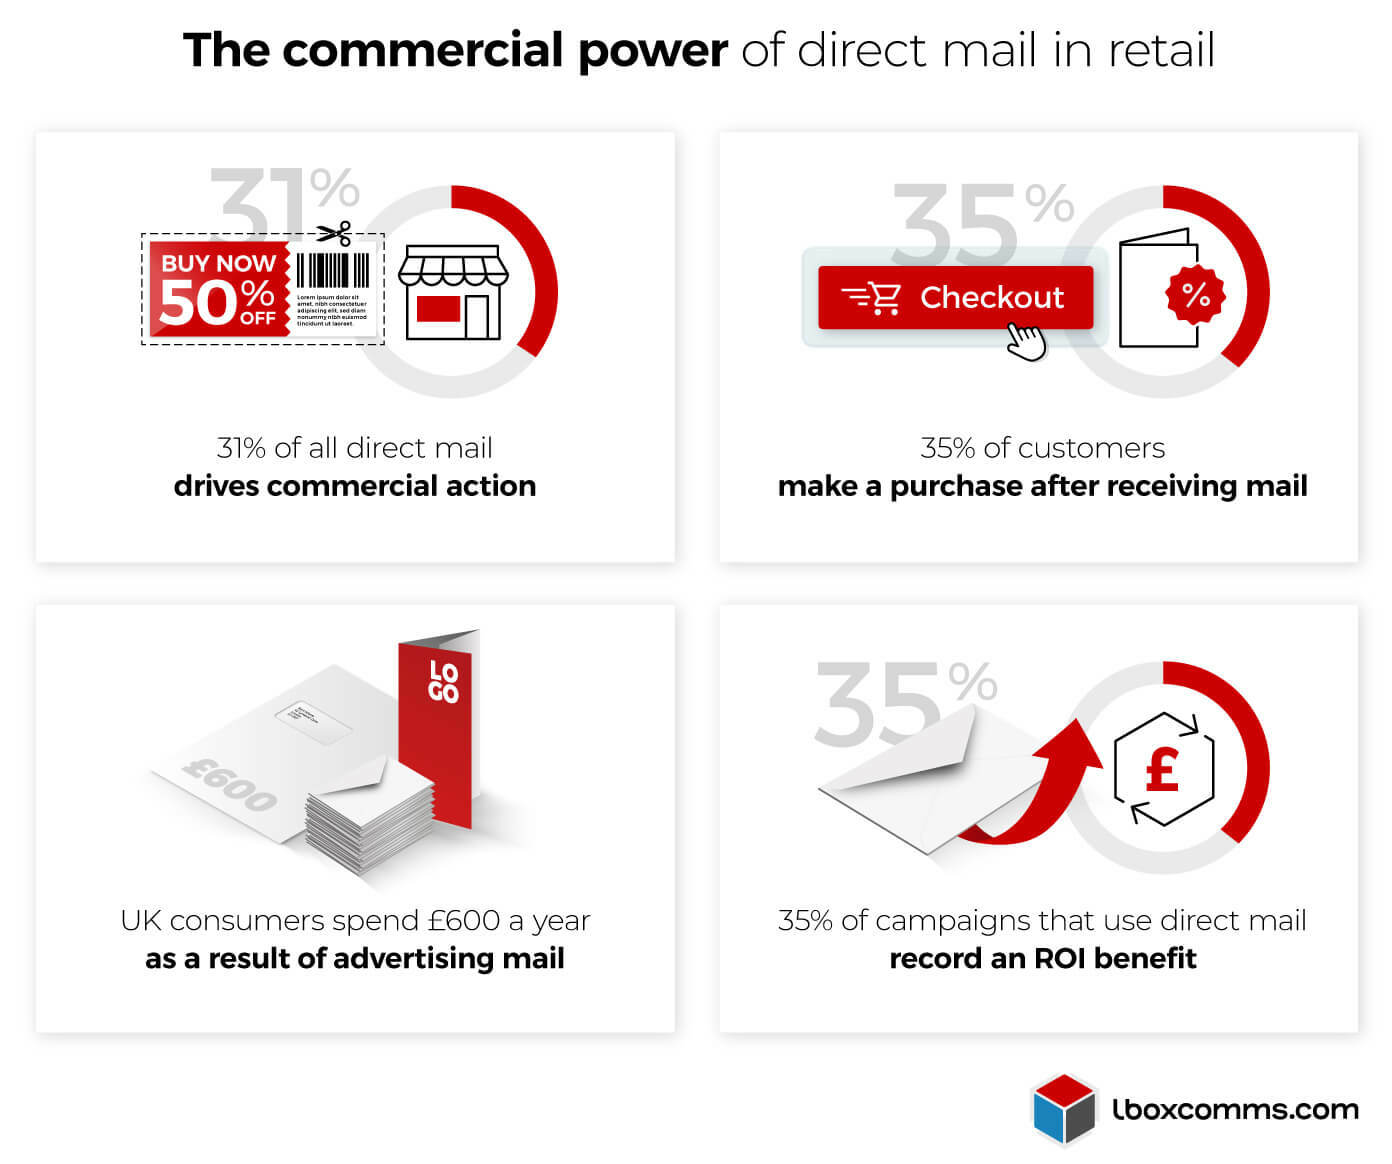 The commercial power of direct mail in retail advertising - infographic image